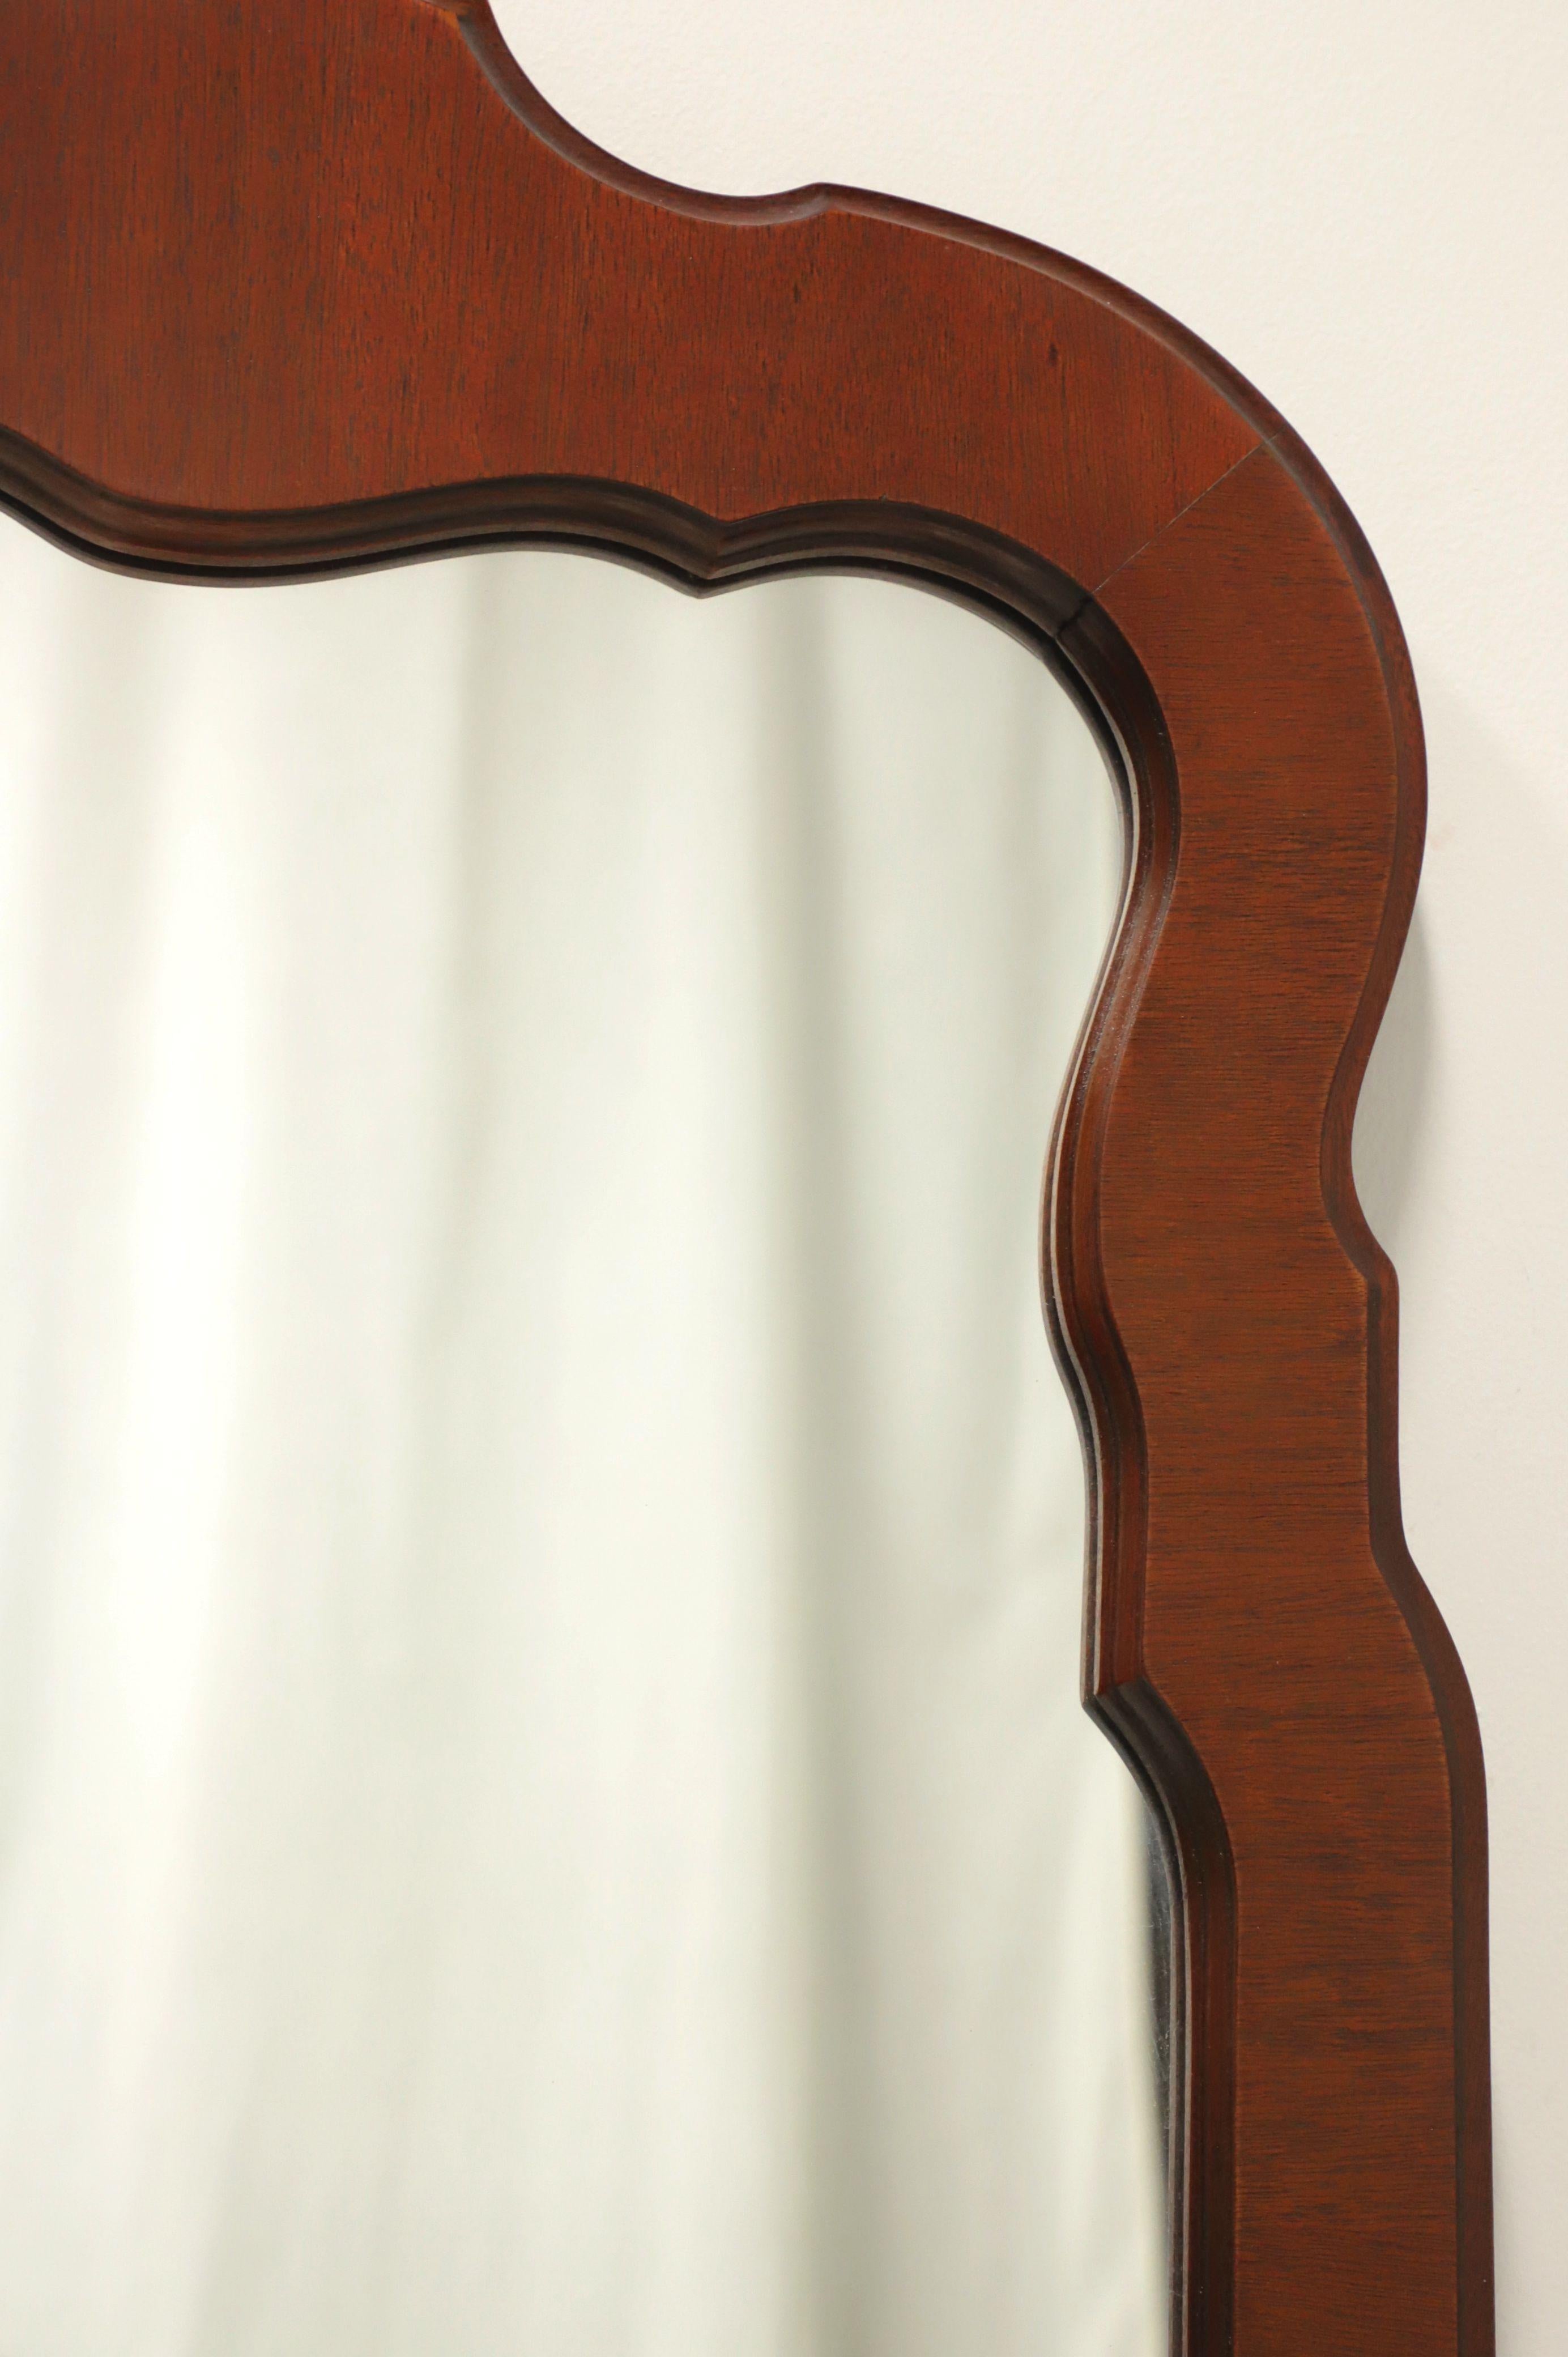 LINK-TAYLOR Heirloom Solid Mahogany Chippendale Wall Mirror In Good Condition For Sale In Charlotte, NC